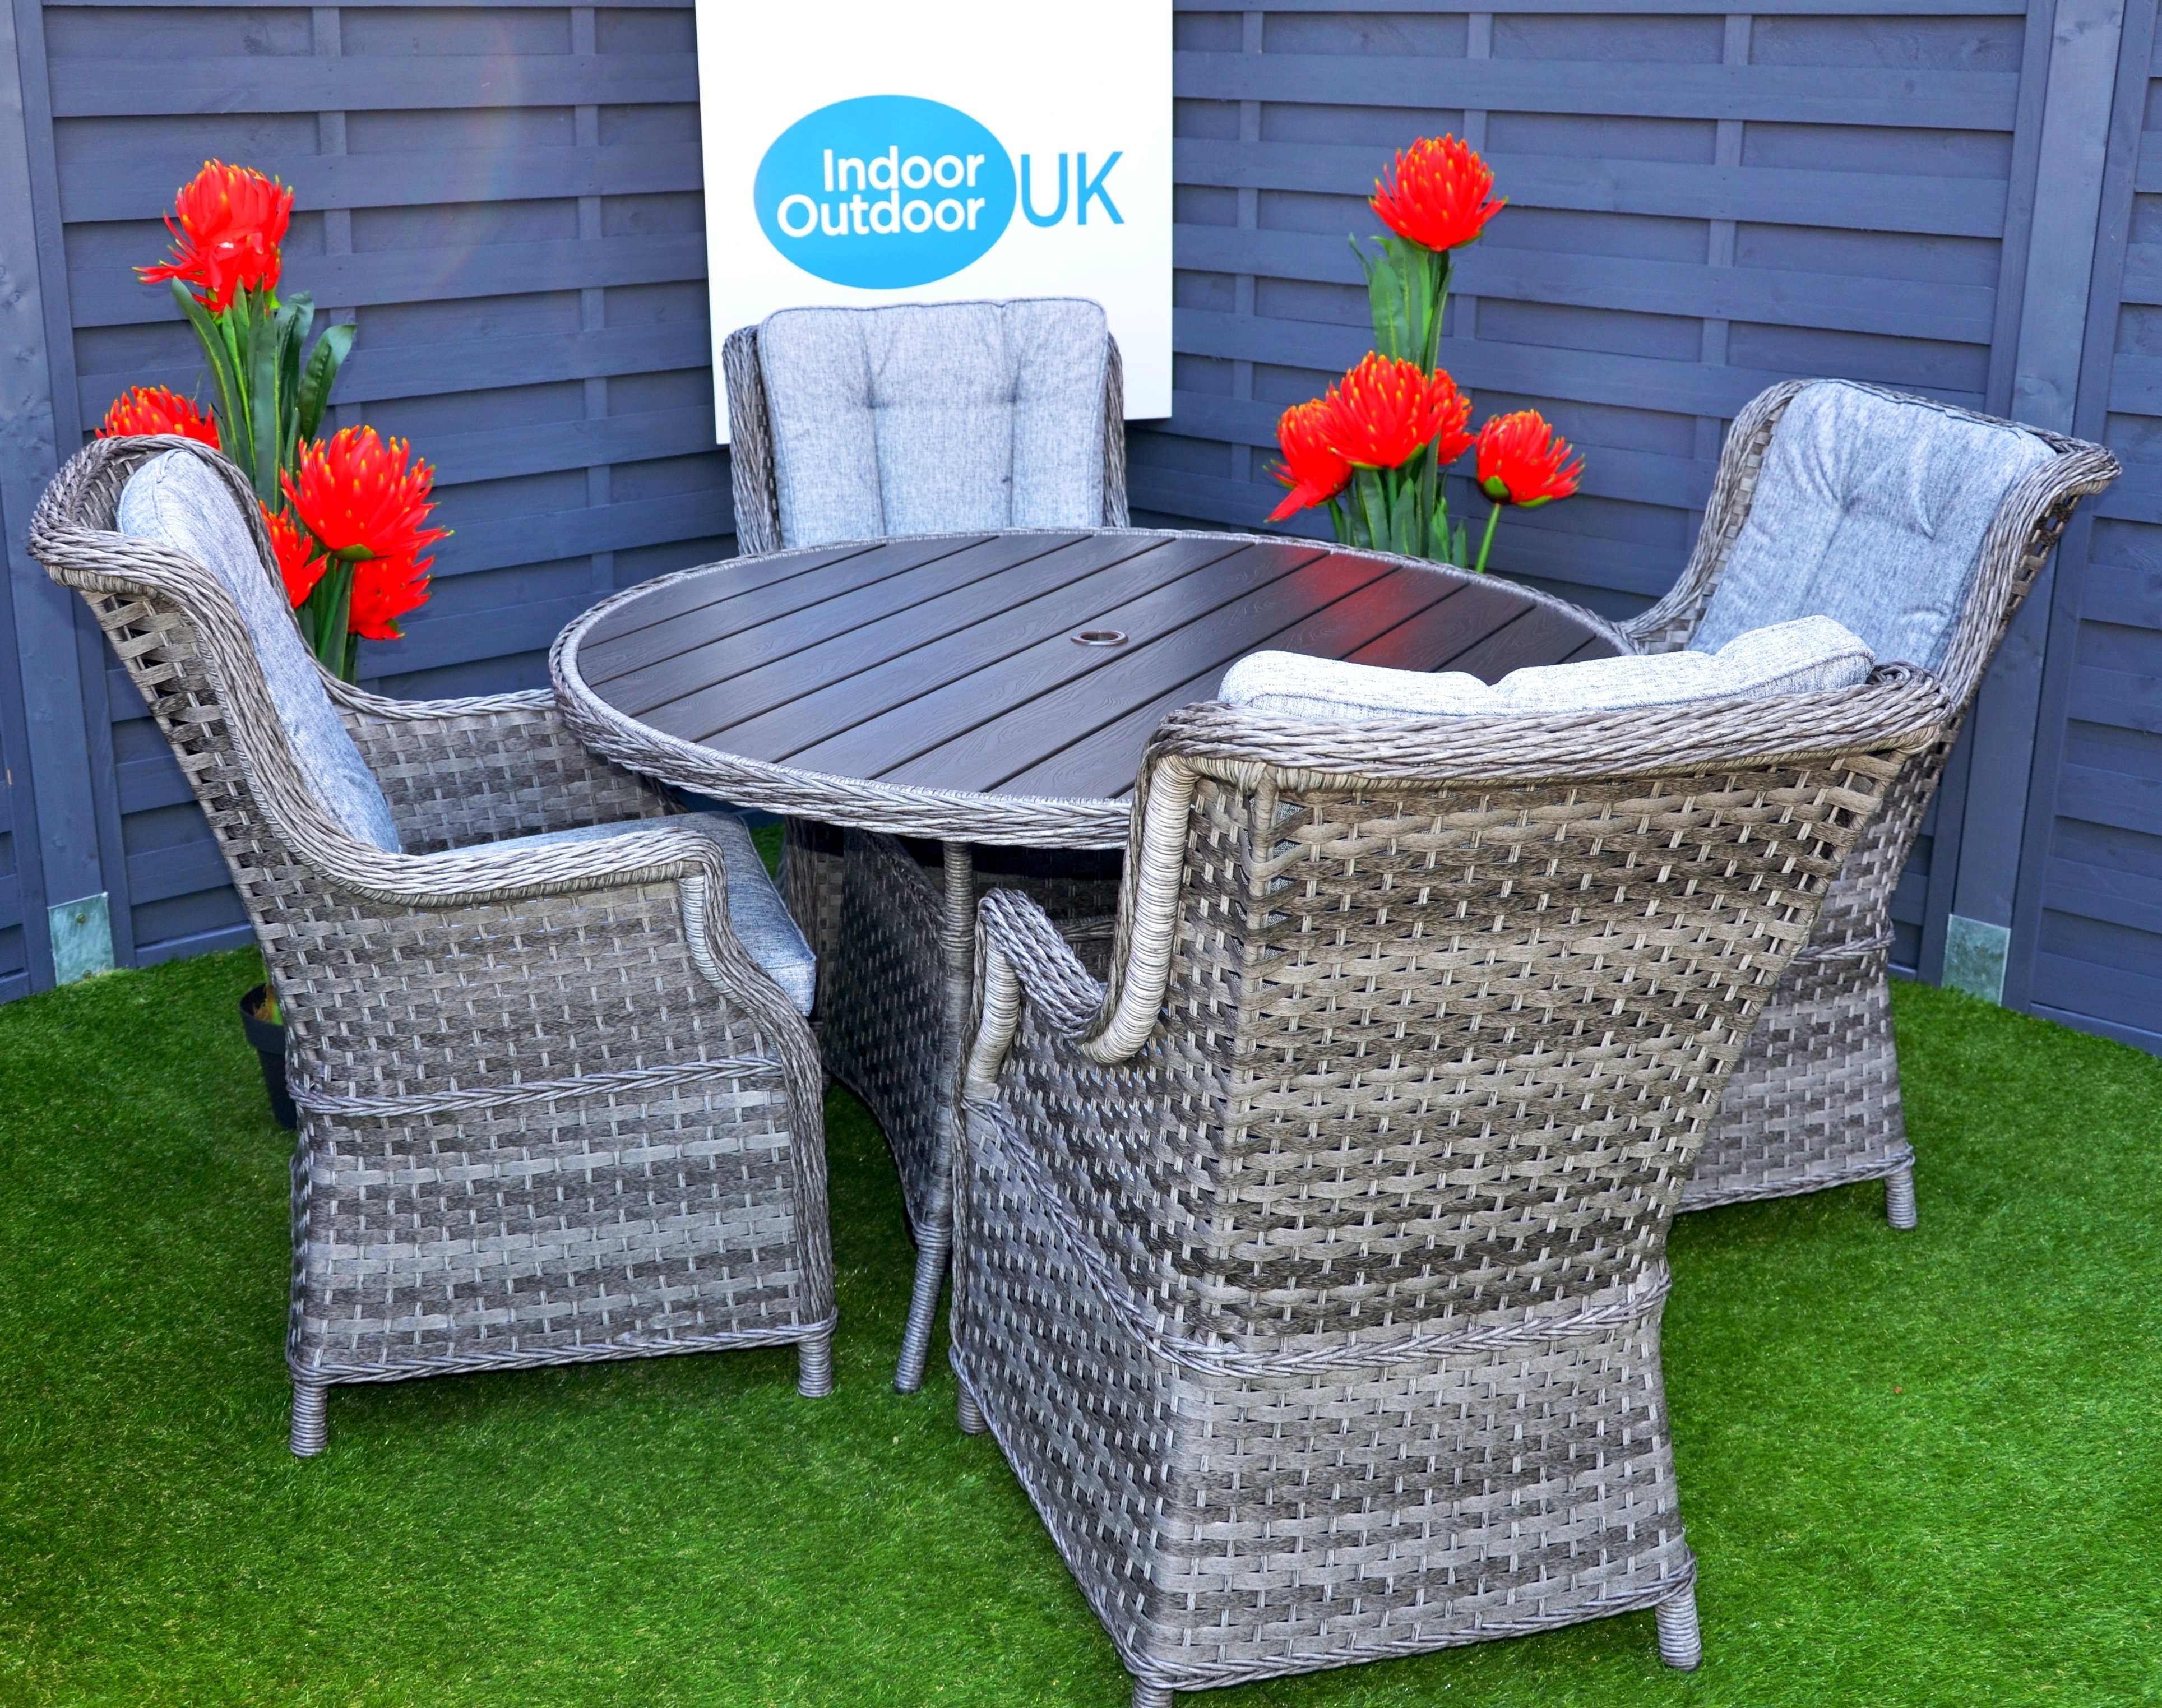 Hatherton 4 or 6 Seater Rattan Dining Set With Polywood Top- In Grey or Natural AVAILABILITY 15th JULY – 6 seater dining set grey